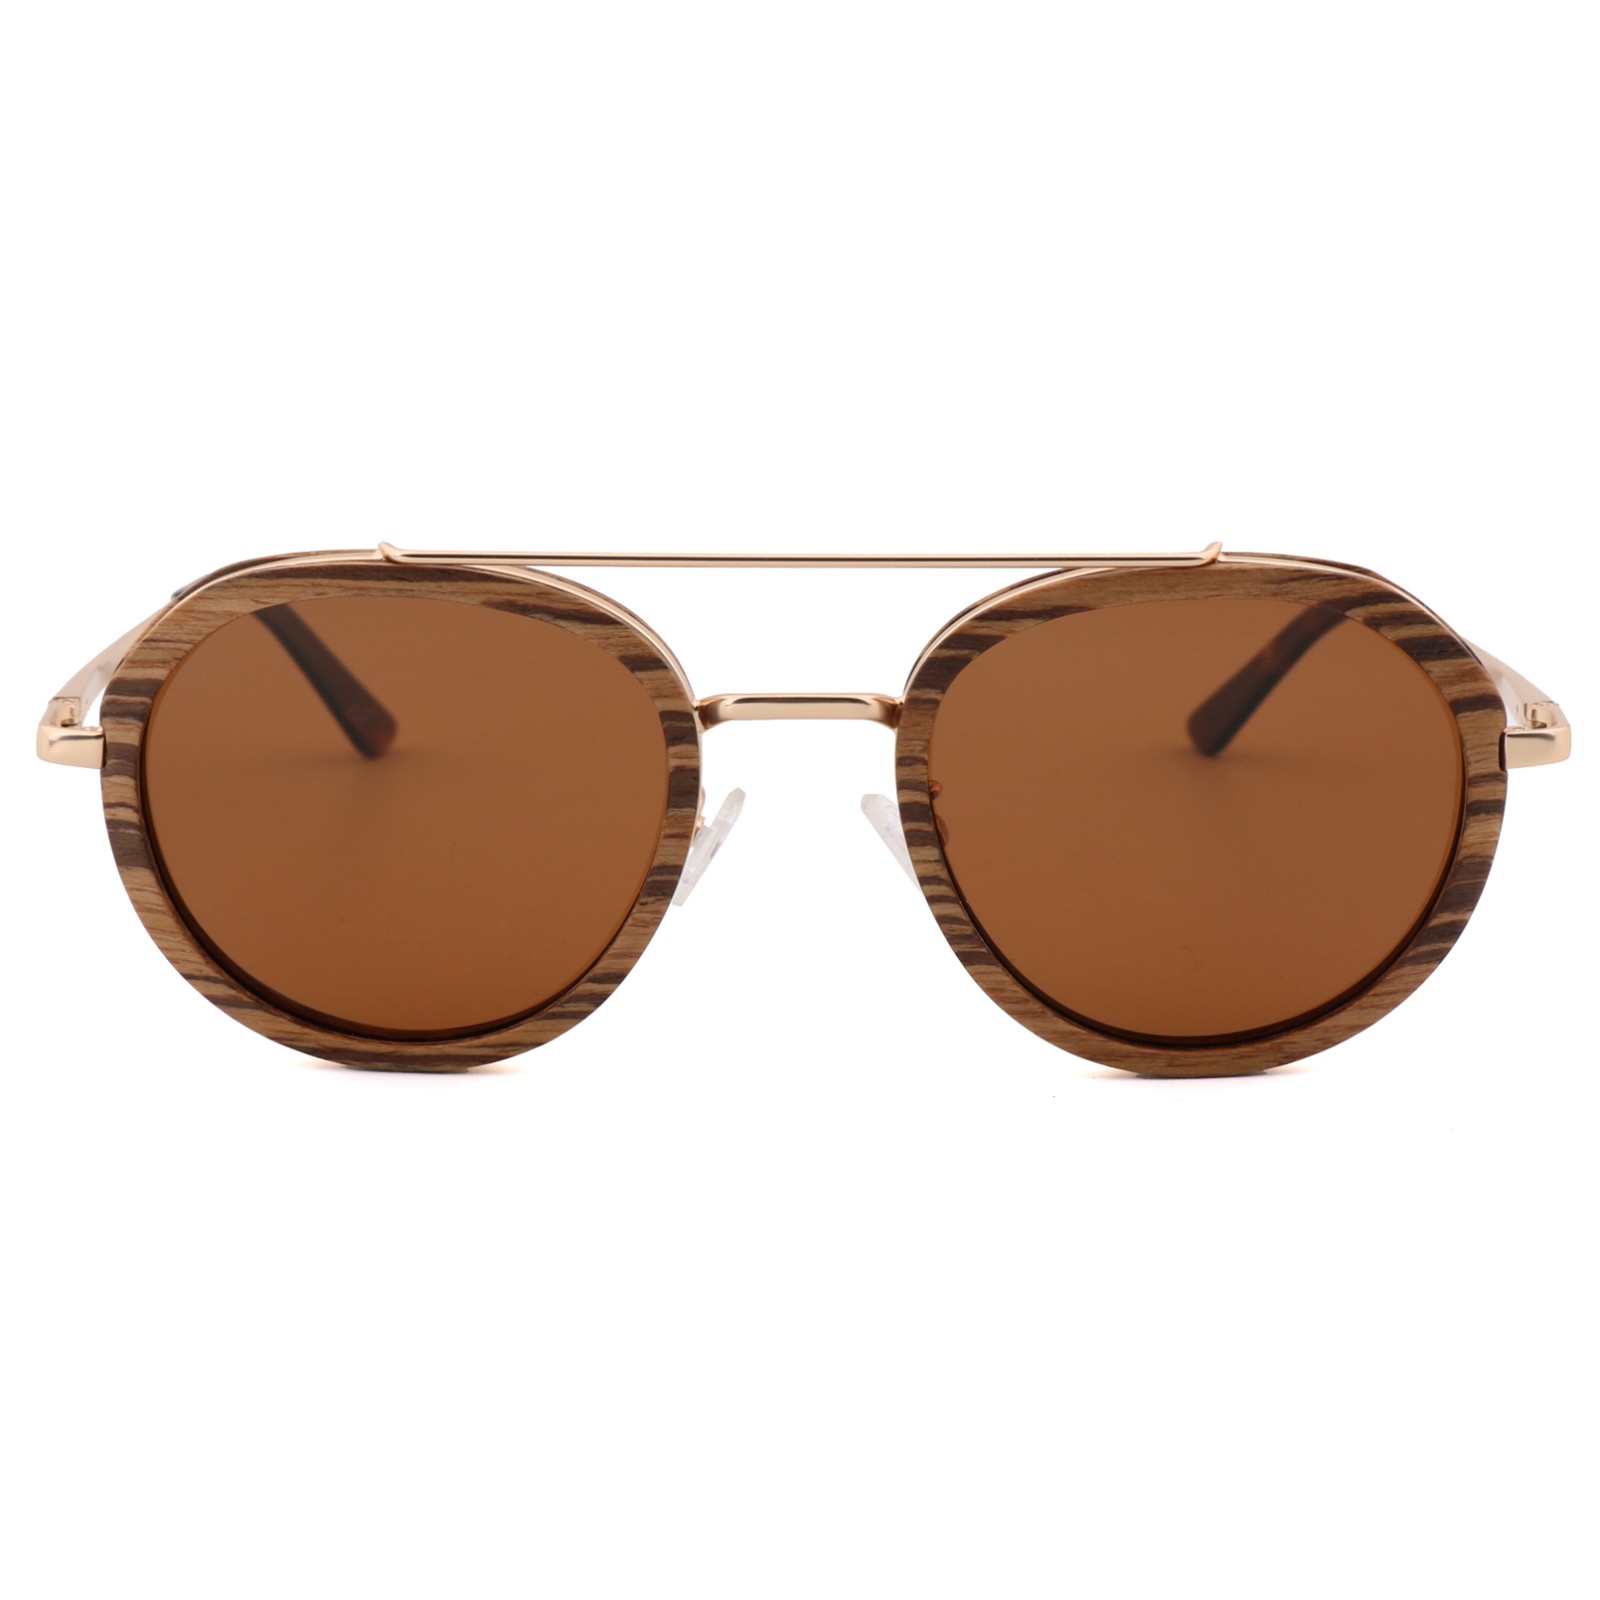 (RTS) SQ-56232 wooden sunglasses 2021 Factory hot sale bamboo glasses wooden sunglasses female sunglasses with high quality